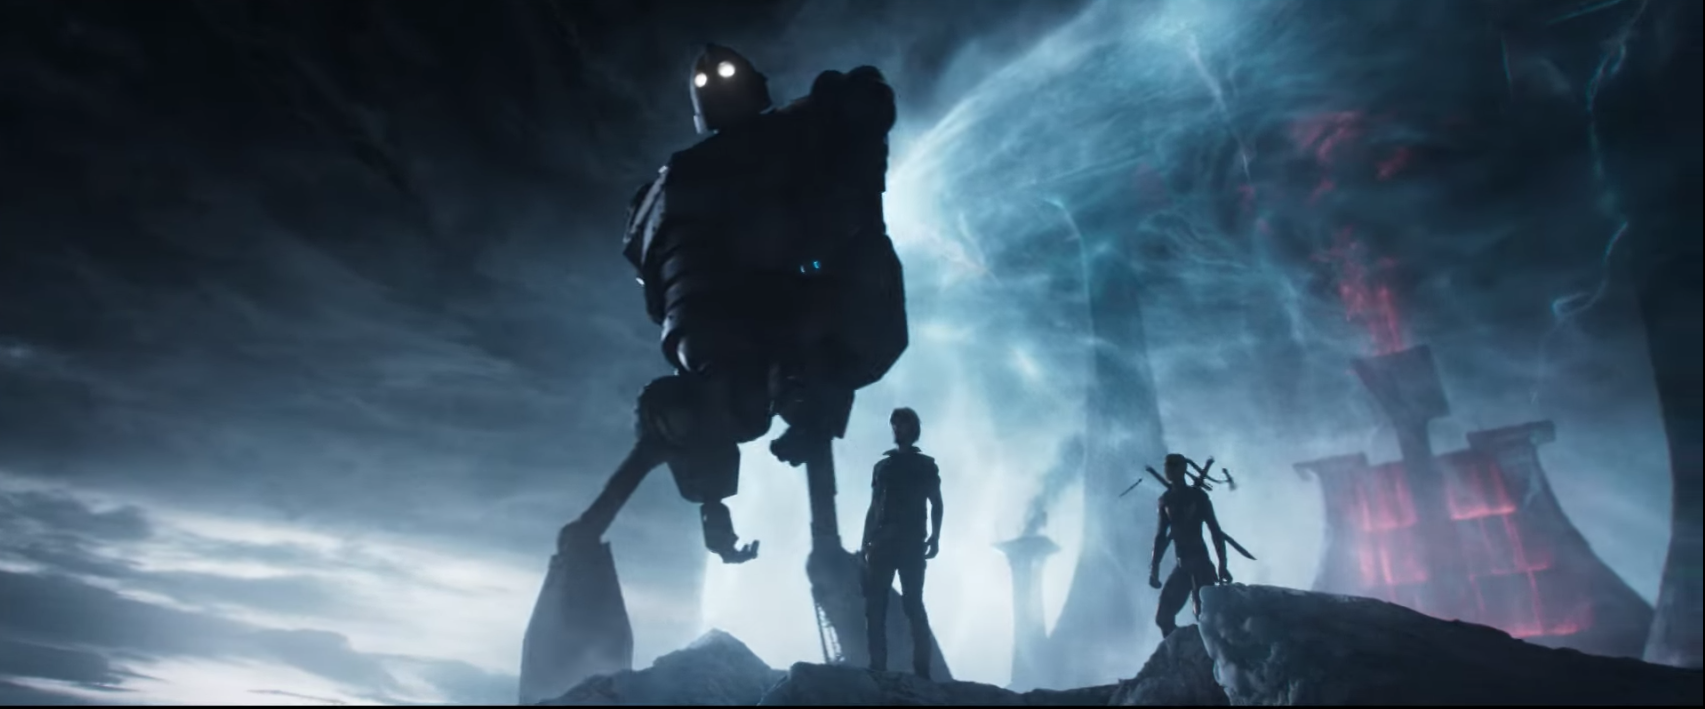 Movie review: 'Ready Player One' is flawed, but tons of fun